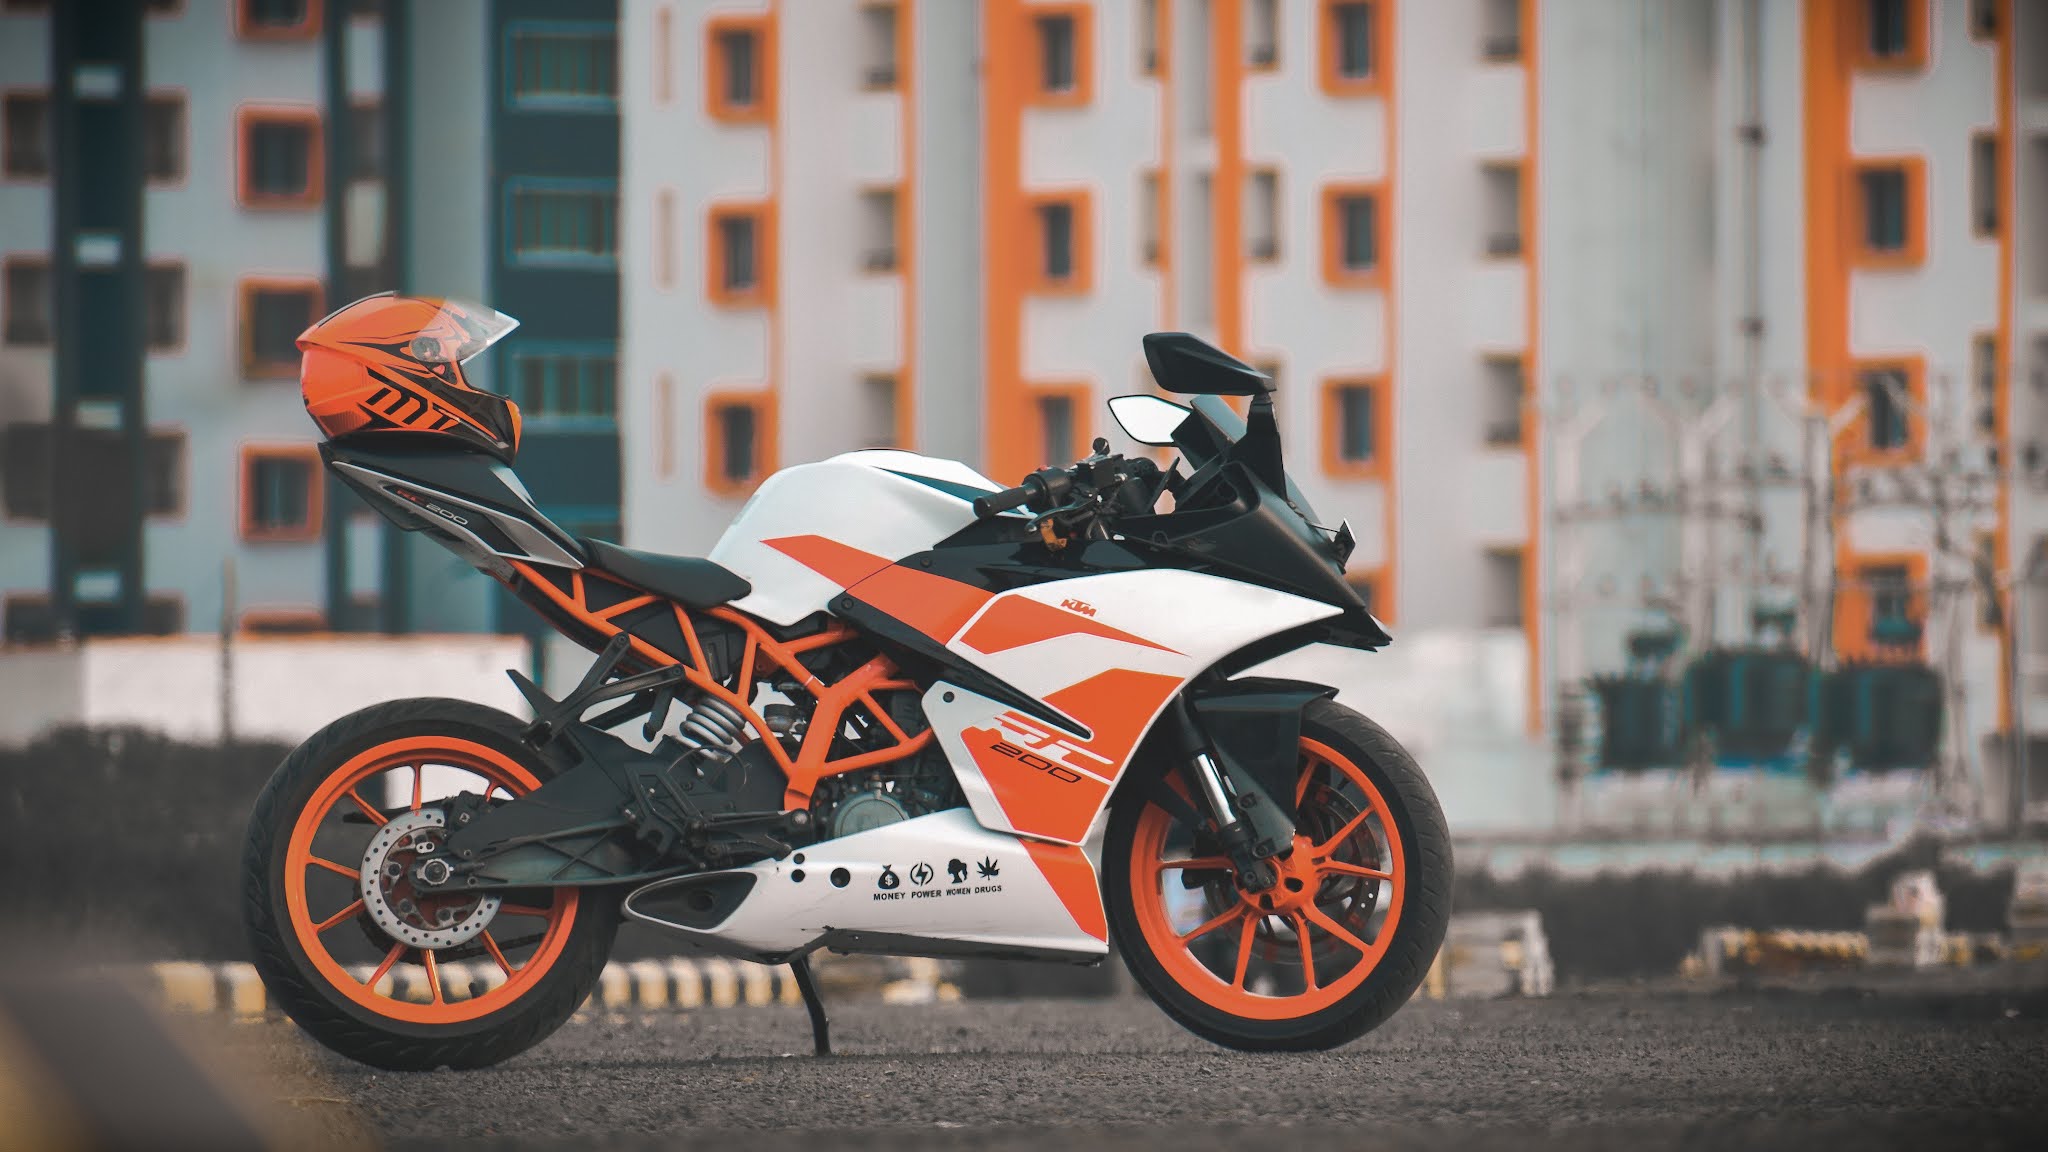 KTM RC 200 Price, Mileage, Specifications, Colors, Top Speed and Servicing Schedule